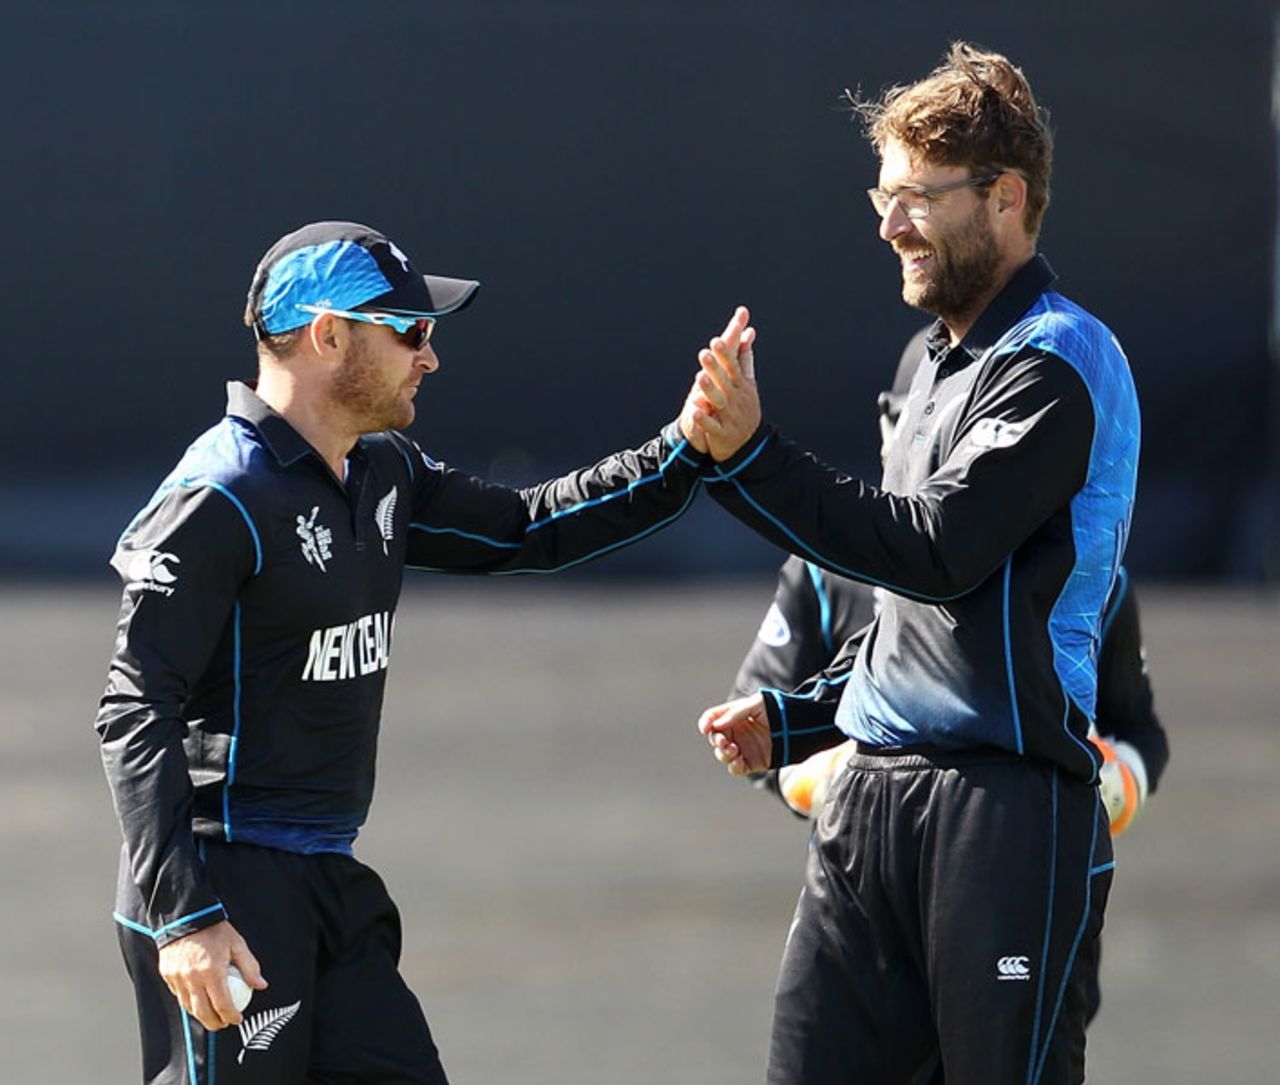 Daniel Vettori got two wickets in one over, New Zealand v South Africa, World Cup warm-up match, Christchurch, February 11, 2015